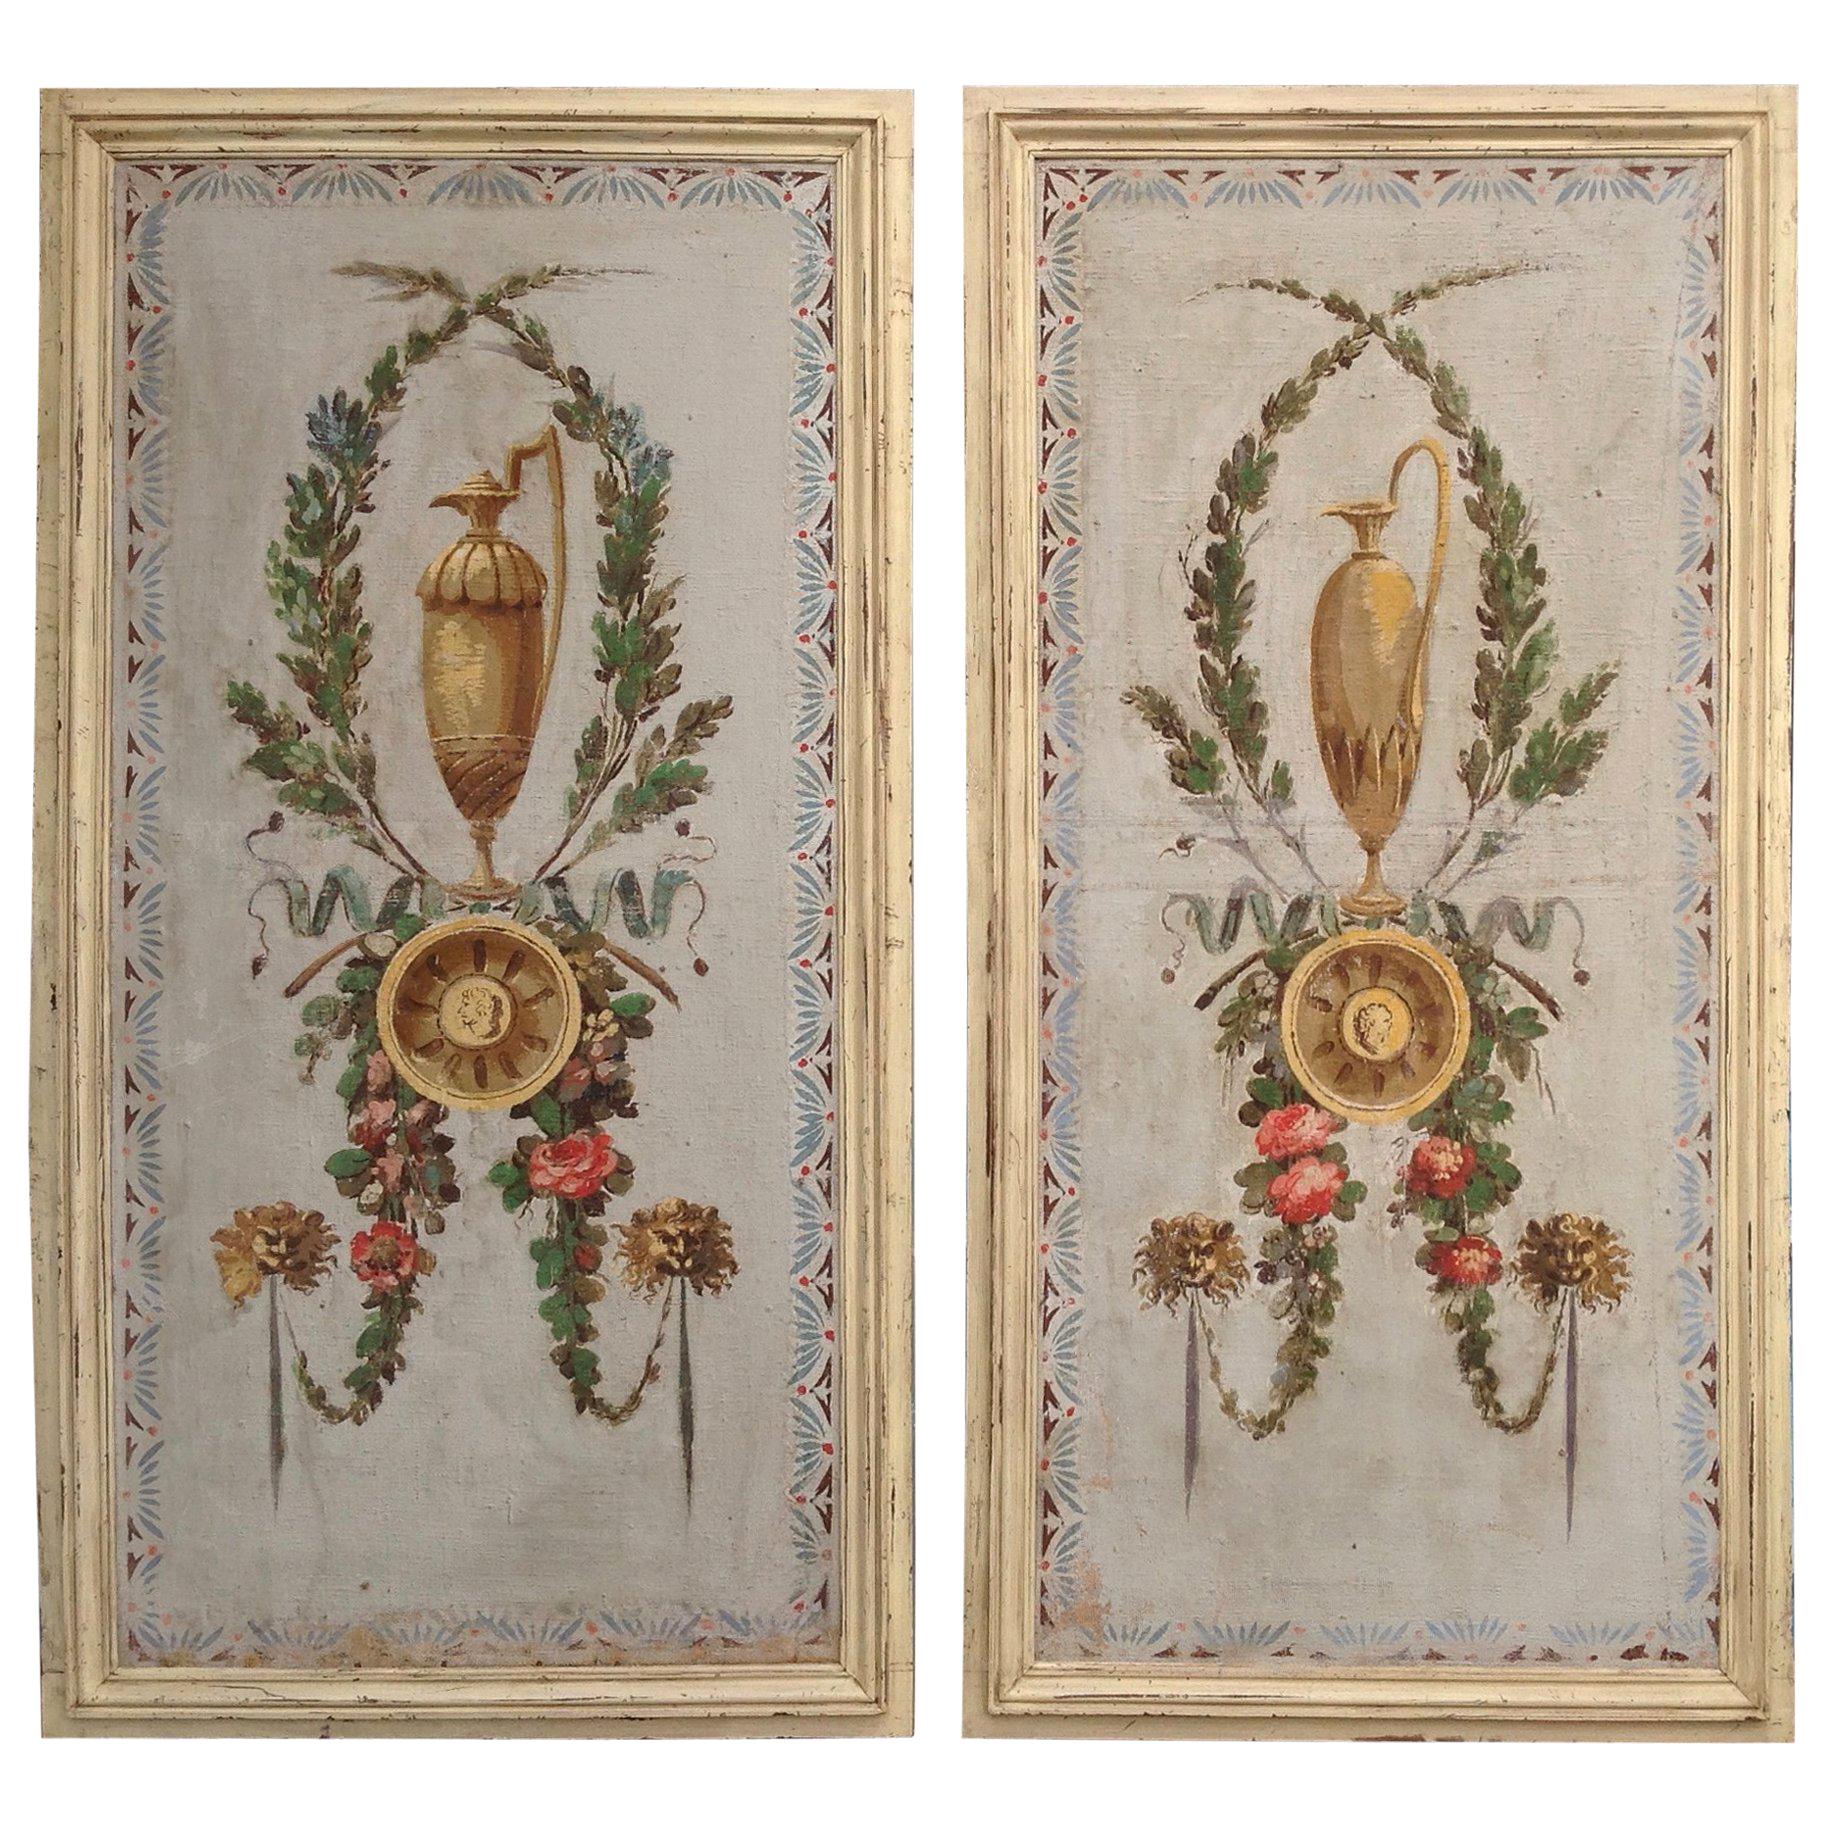 Pair of Antique Painted Canvas Window Panels